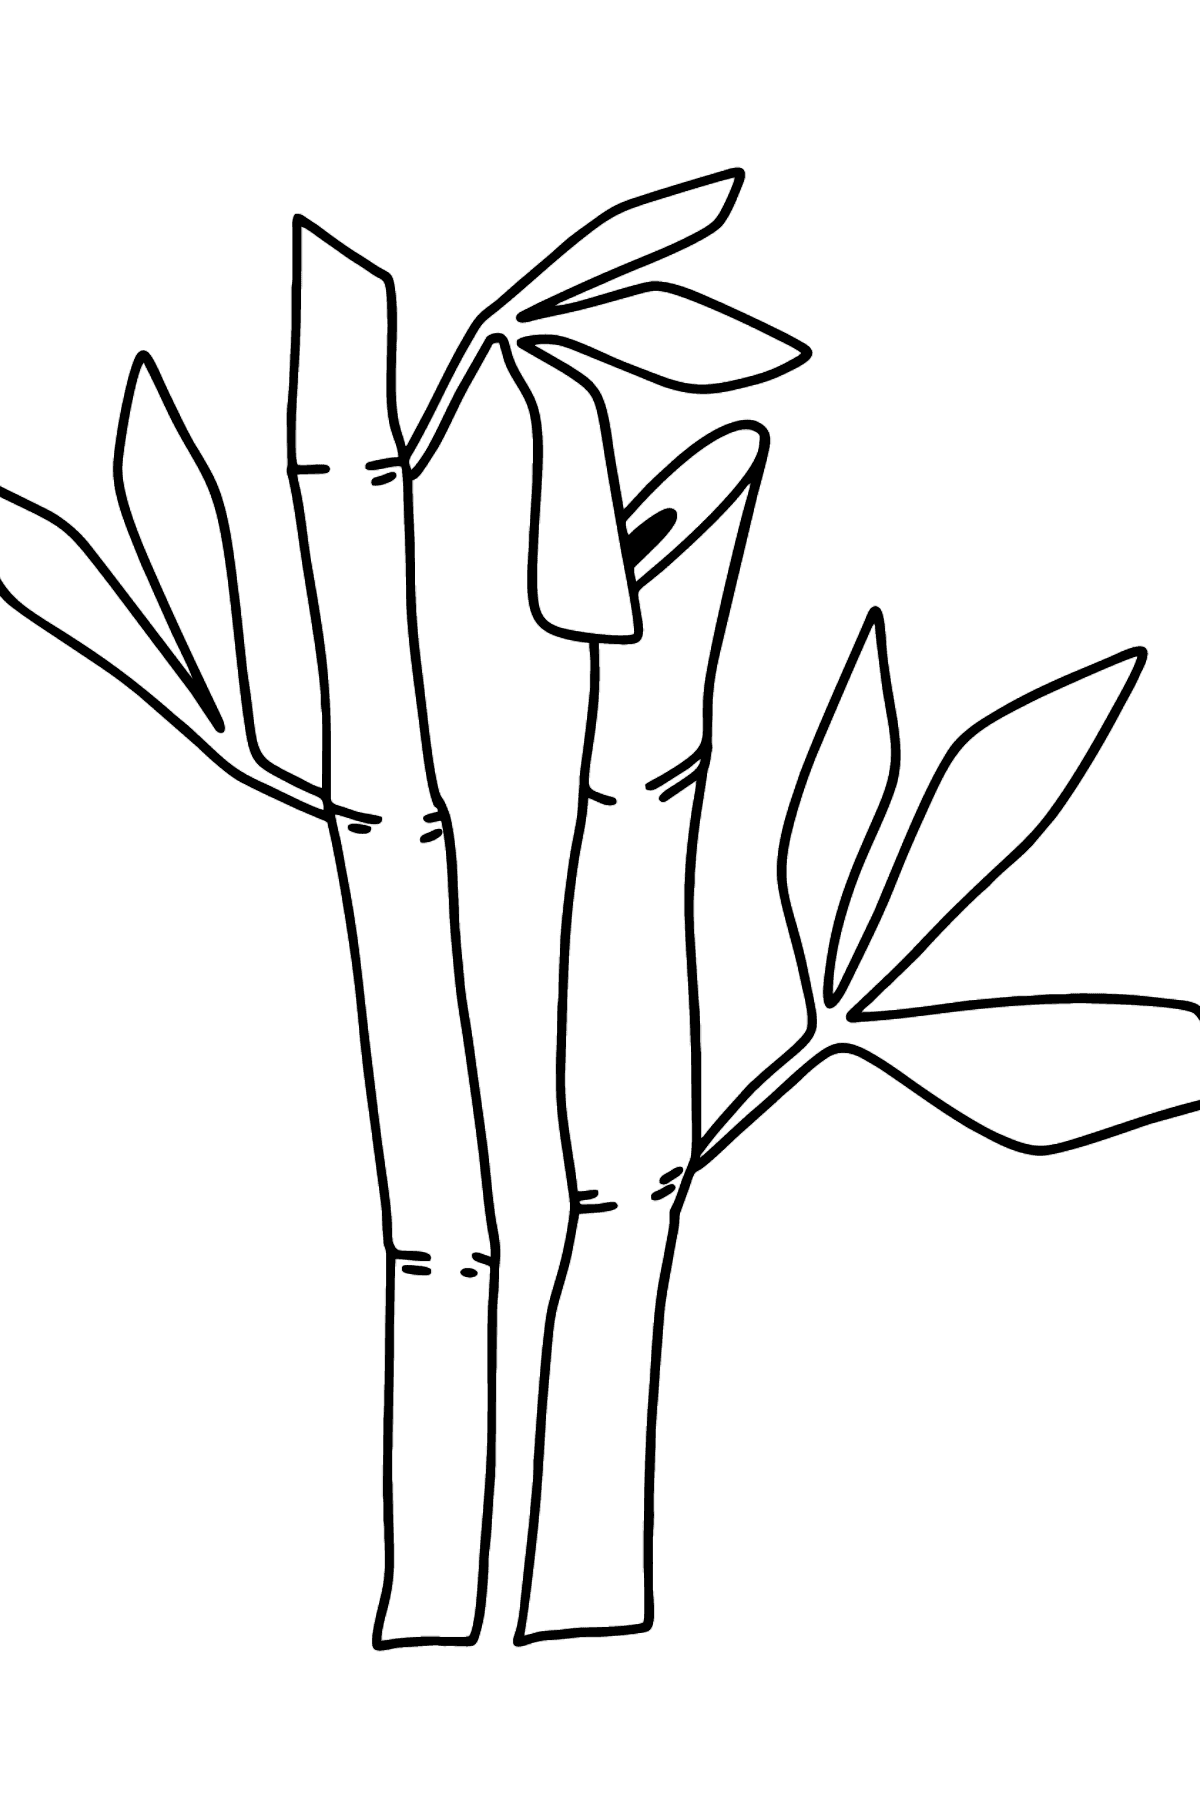 Bamboo coloring page - Coloring Pages for Kids